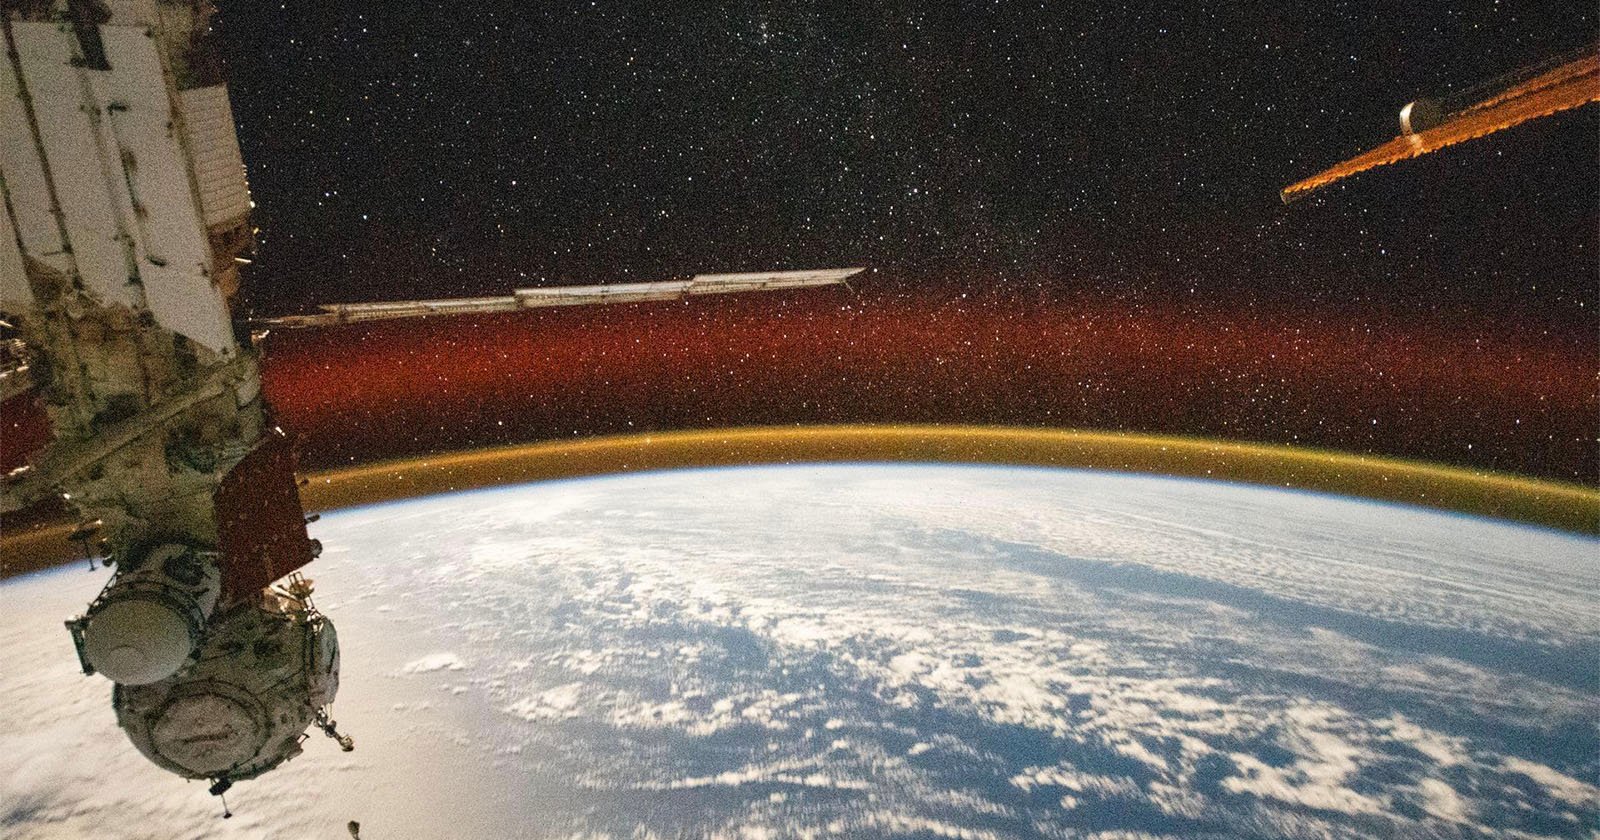 The ISS Captures Earth Glowing Golden in Magnificent Photo